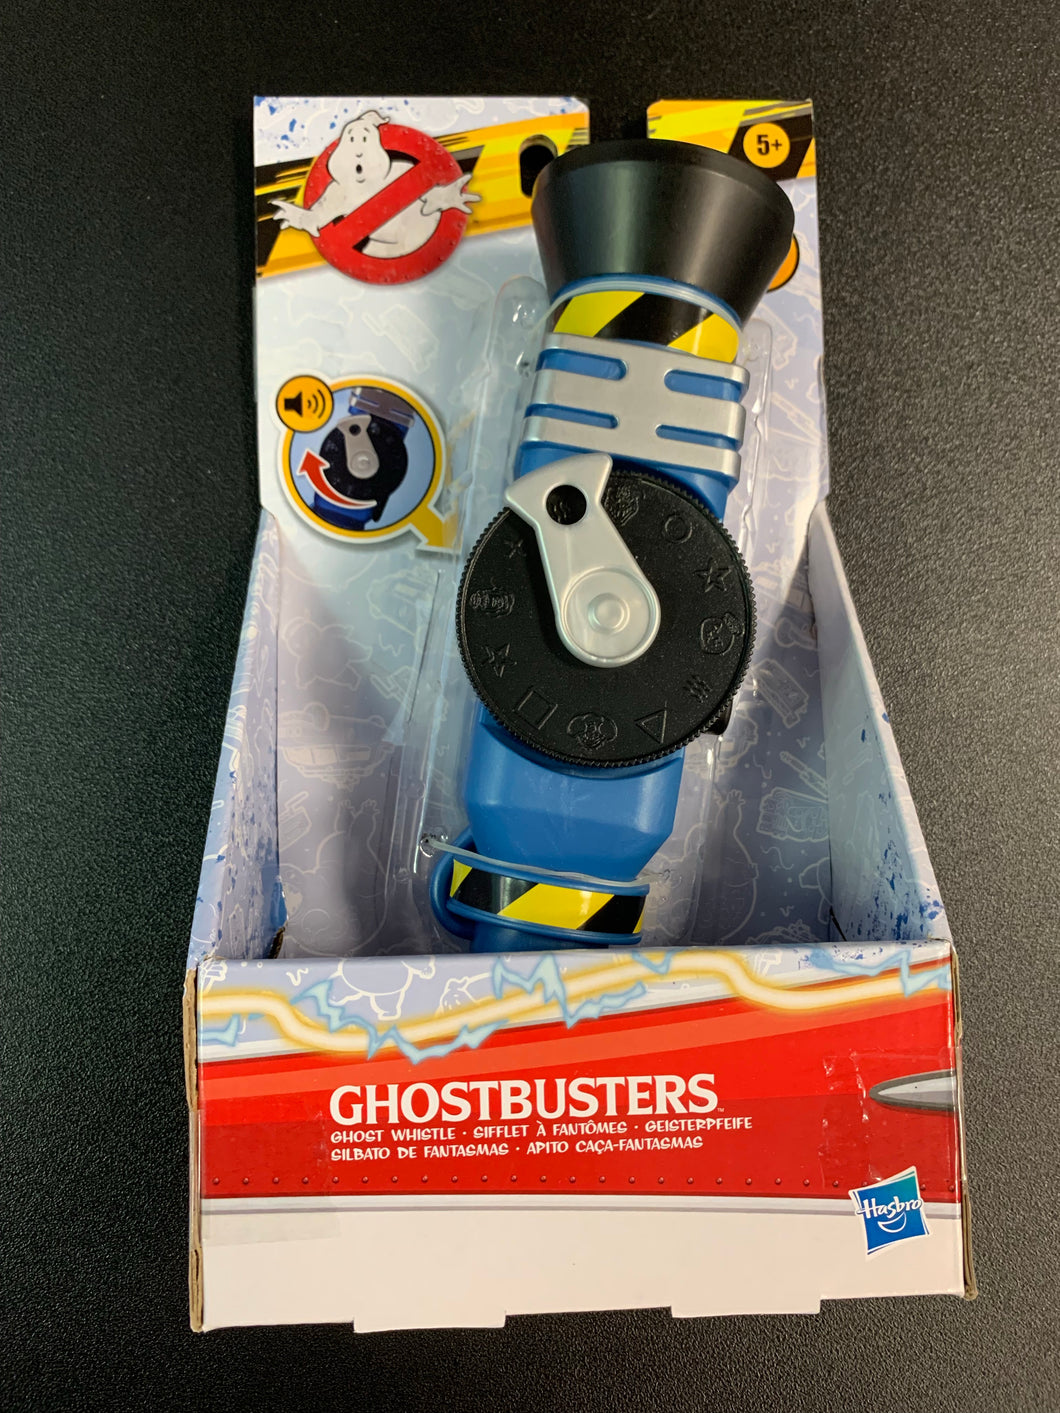 HASBRO GHOSTBUSTERS GHOST WHISTLE